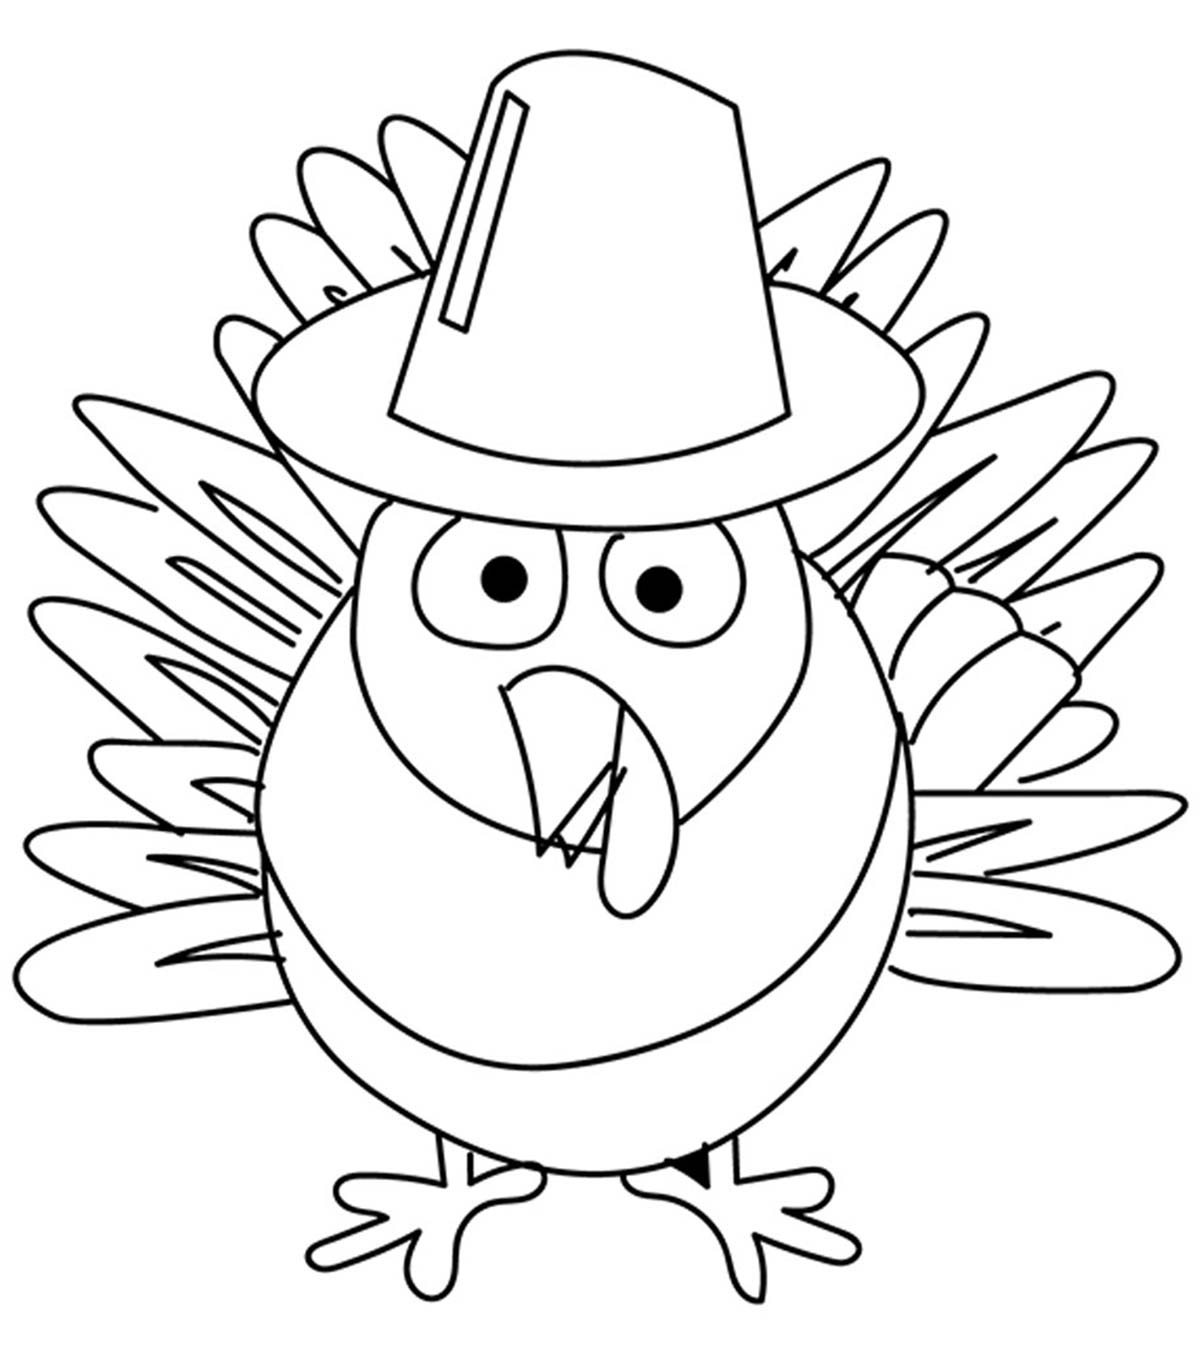 Coloring Pages For Kids Turkey / The most common kids turkey coloring